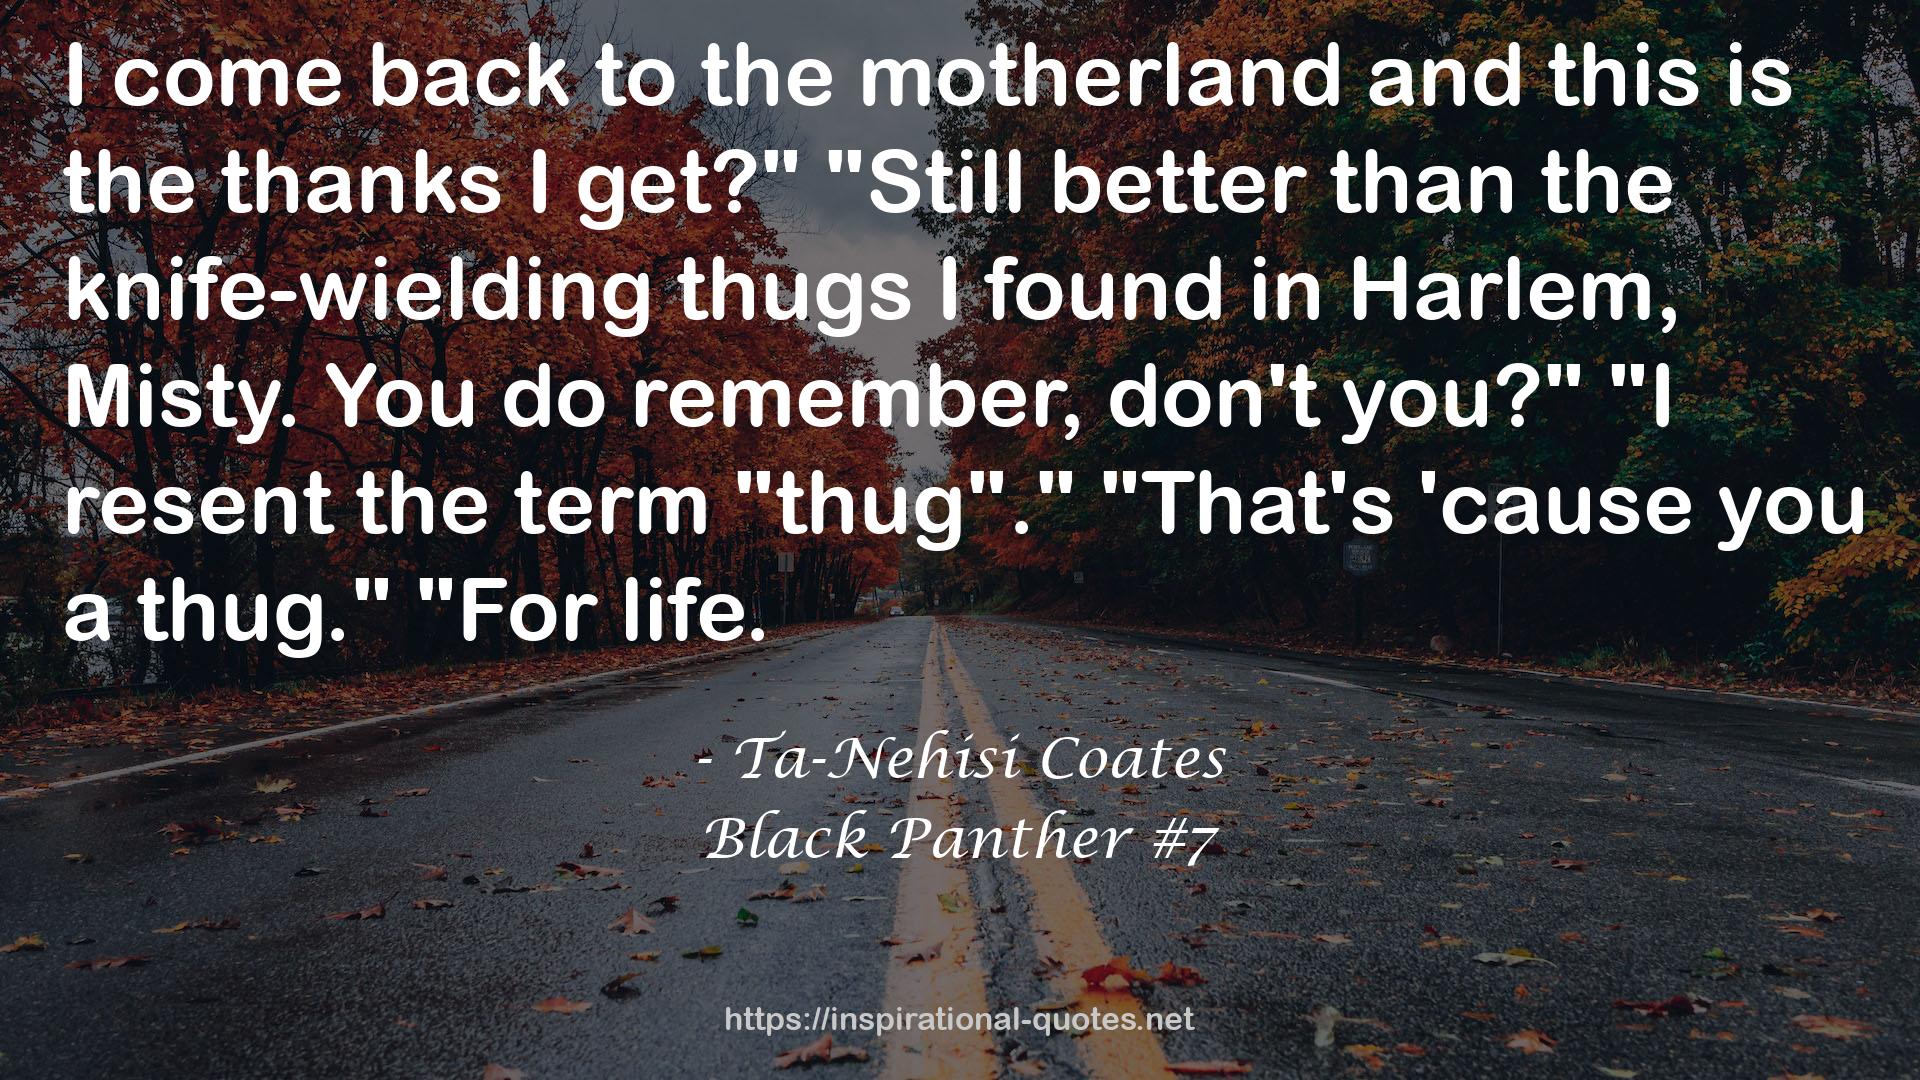 Black Panther #7 QUOTES